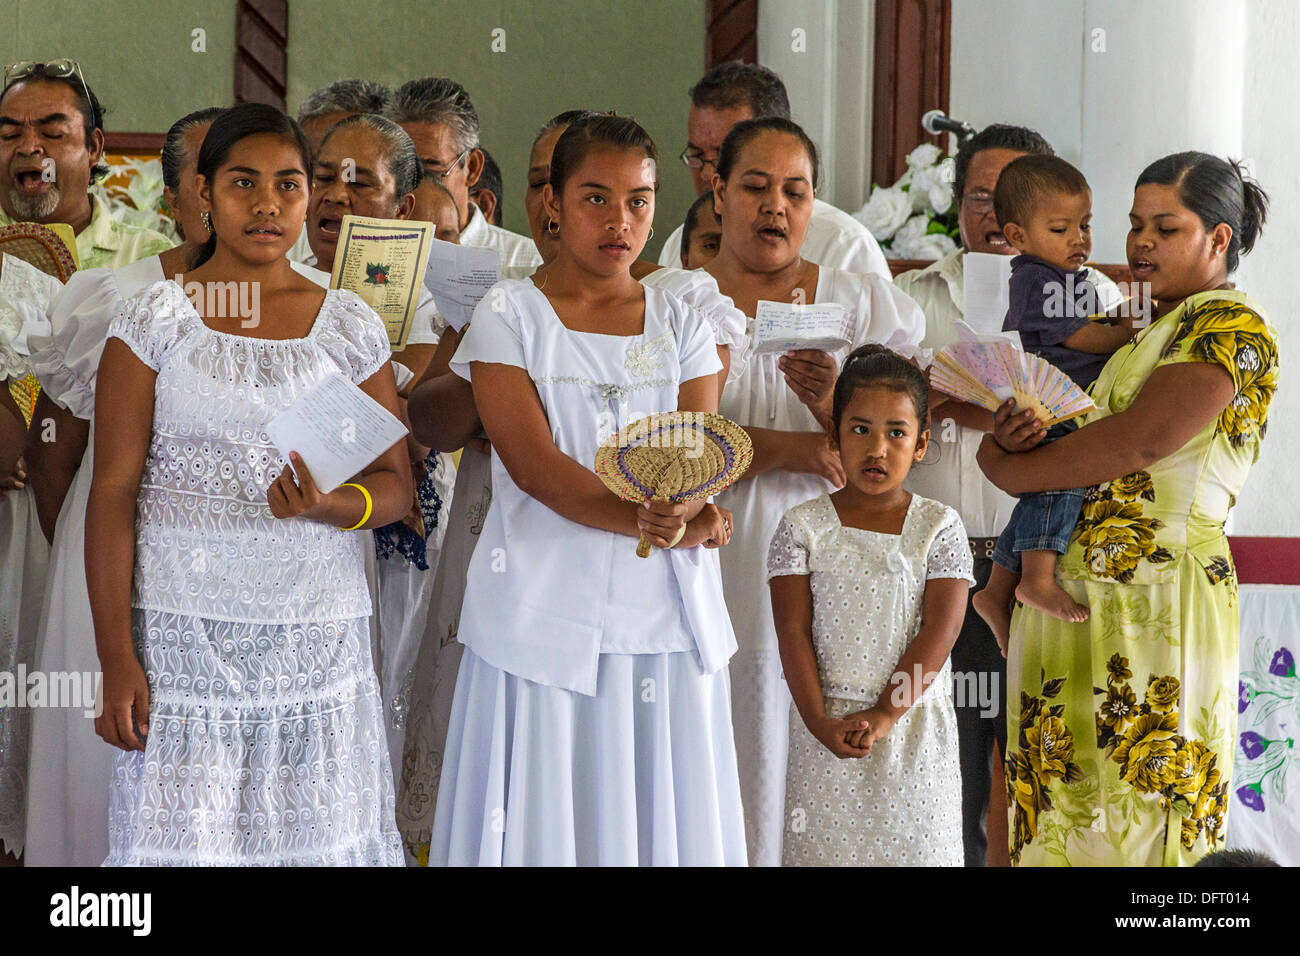 Micronesian women dressed in white lace sing four part choral harmony during church service in Tafunsak, Kosrae, Micronesia Stock Photo